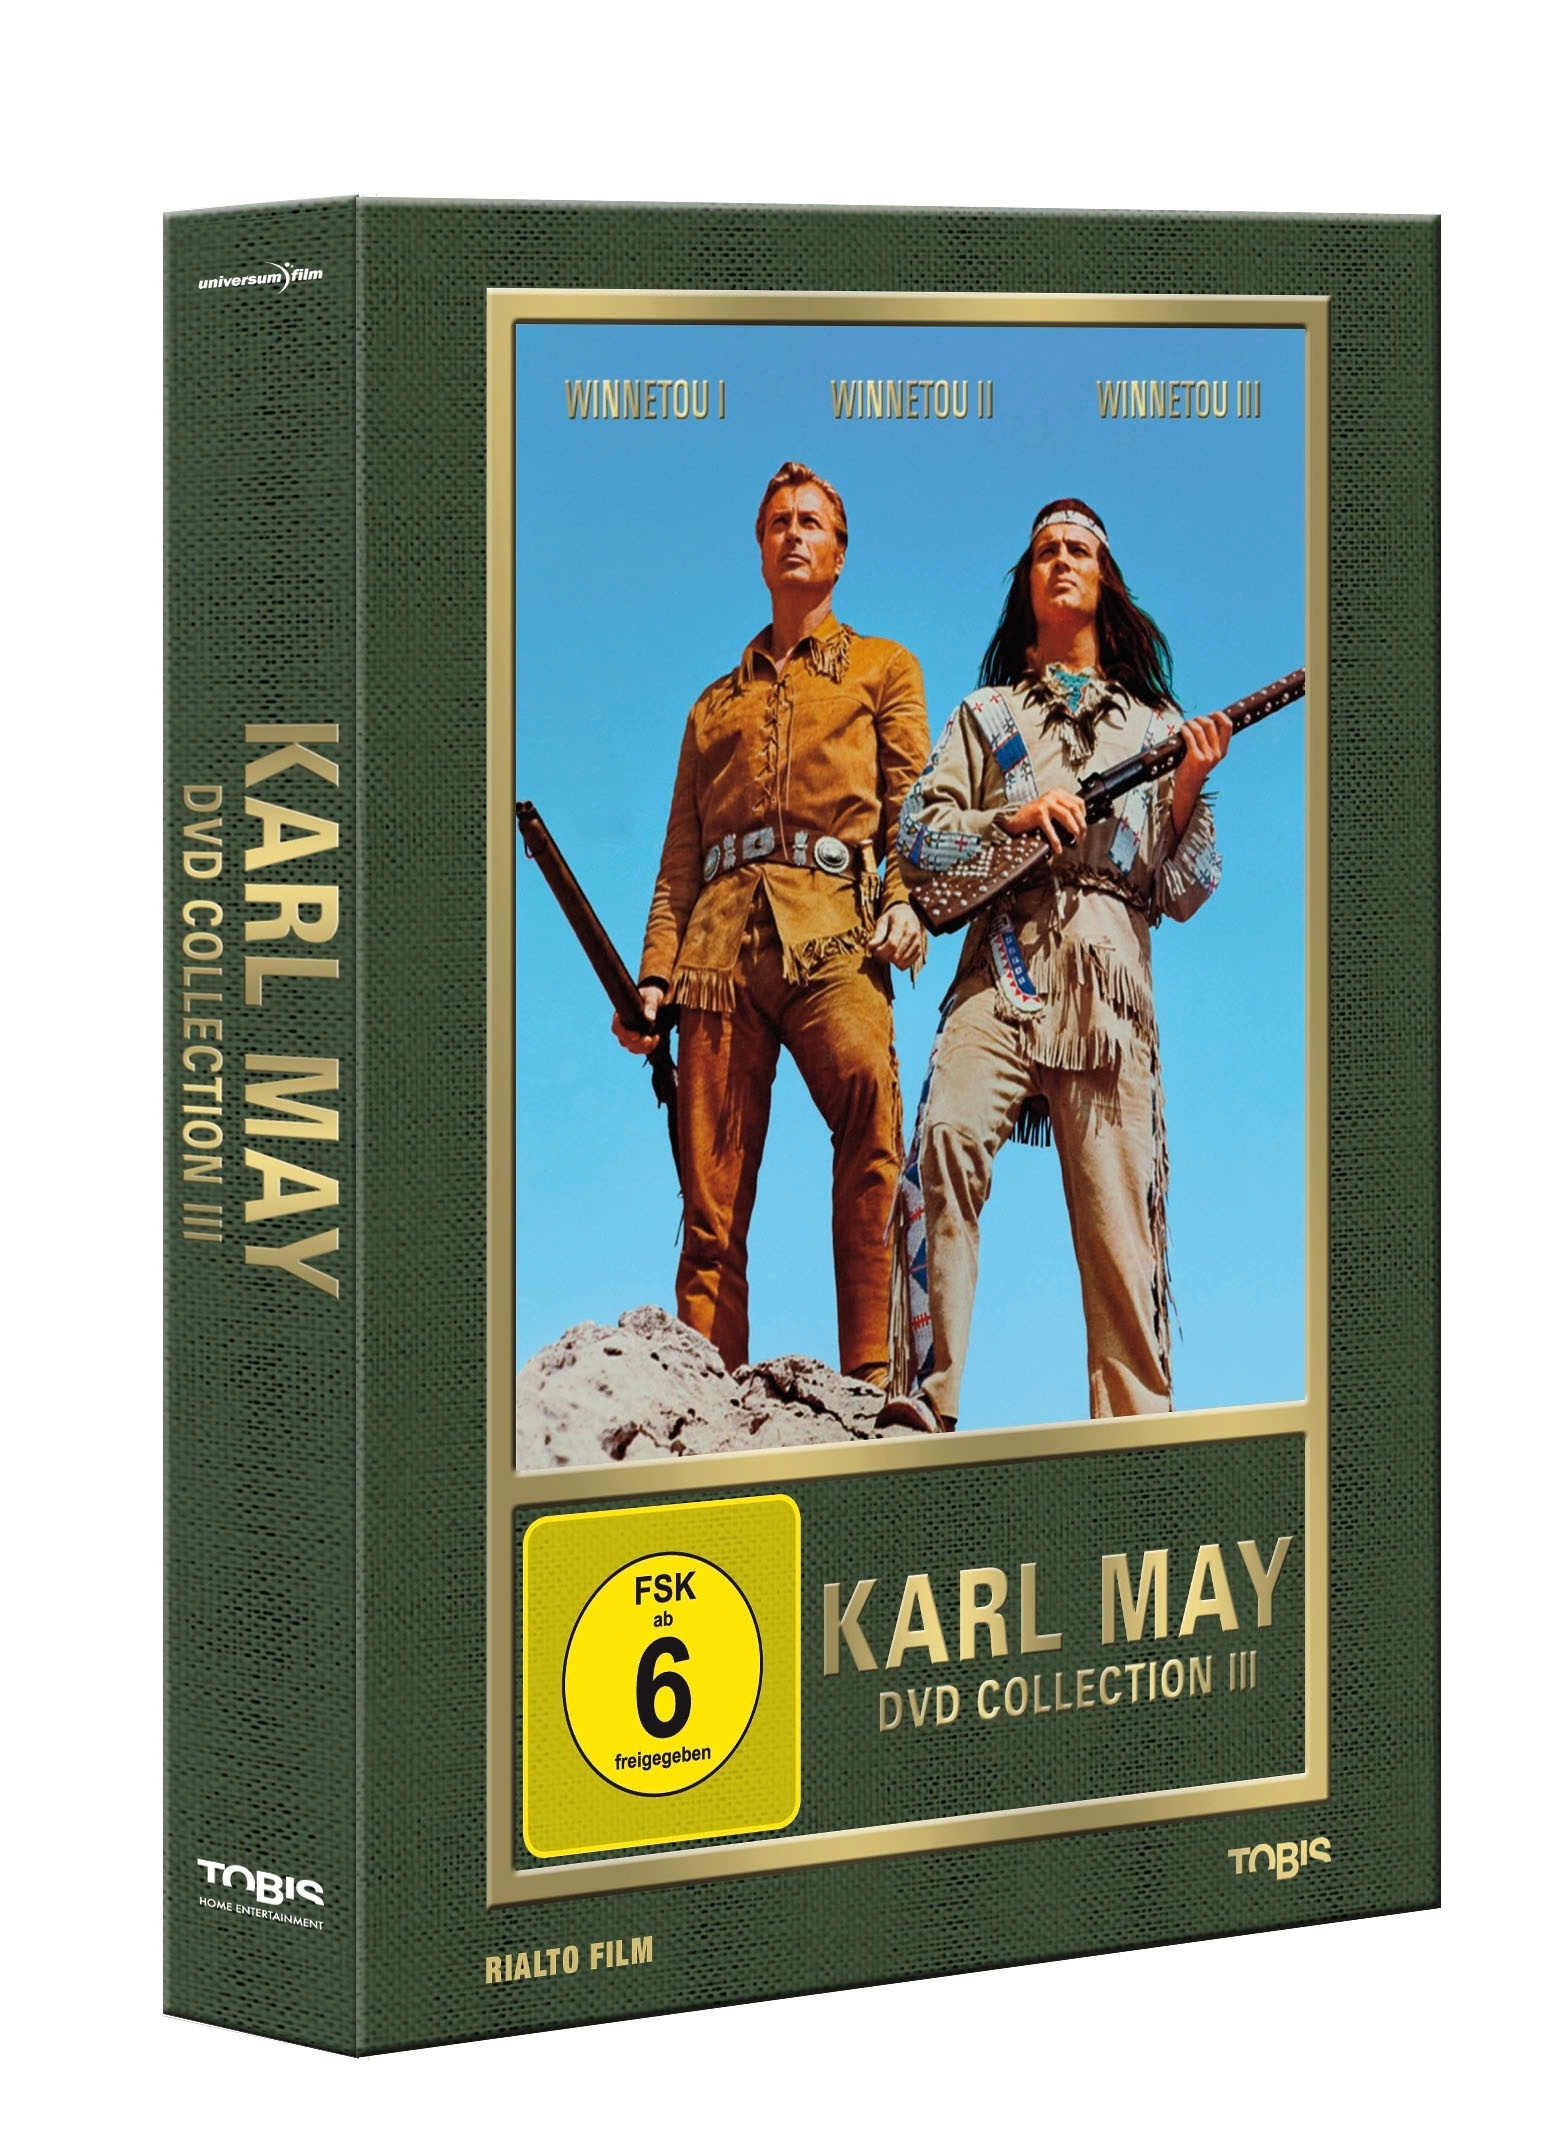 Image of Karl May DVD Collection 3 - Winnetou 1-3